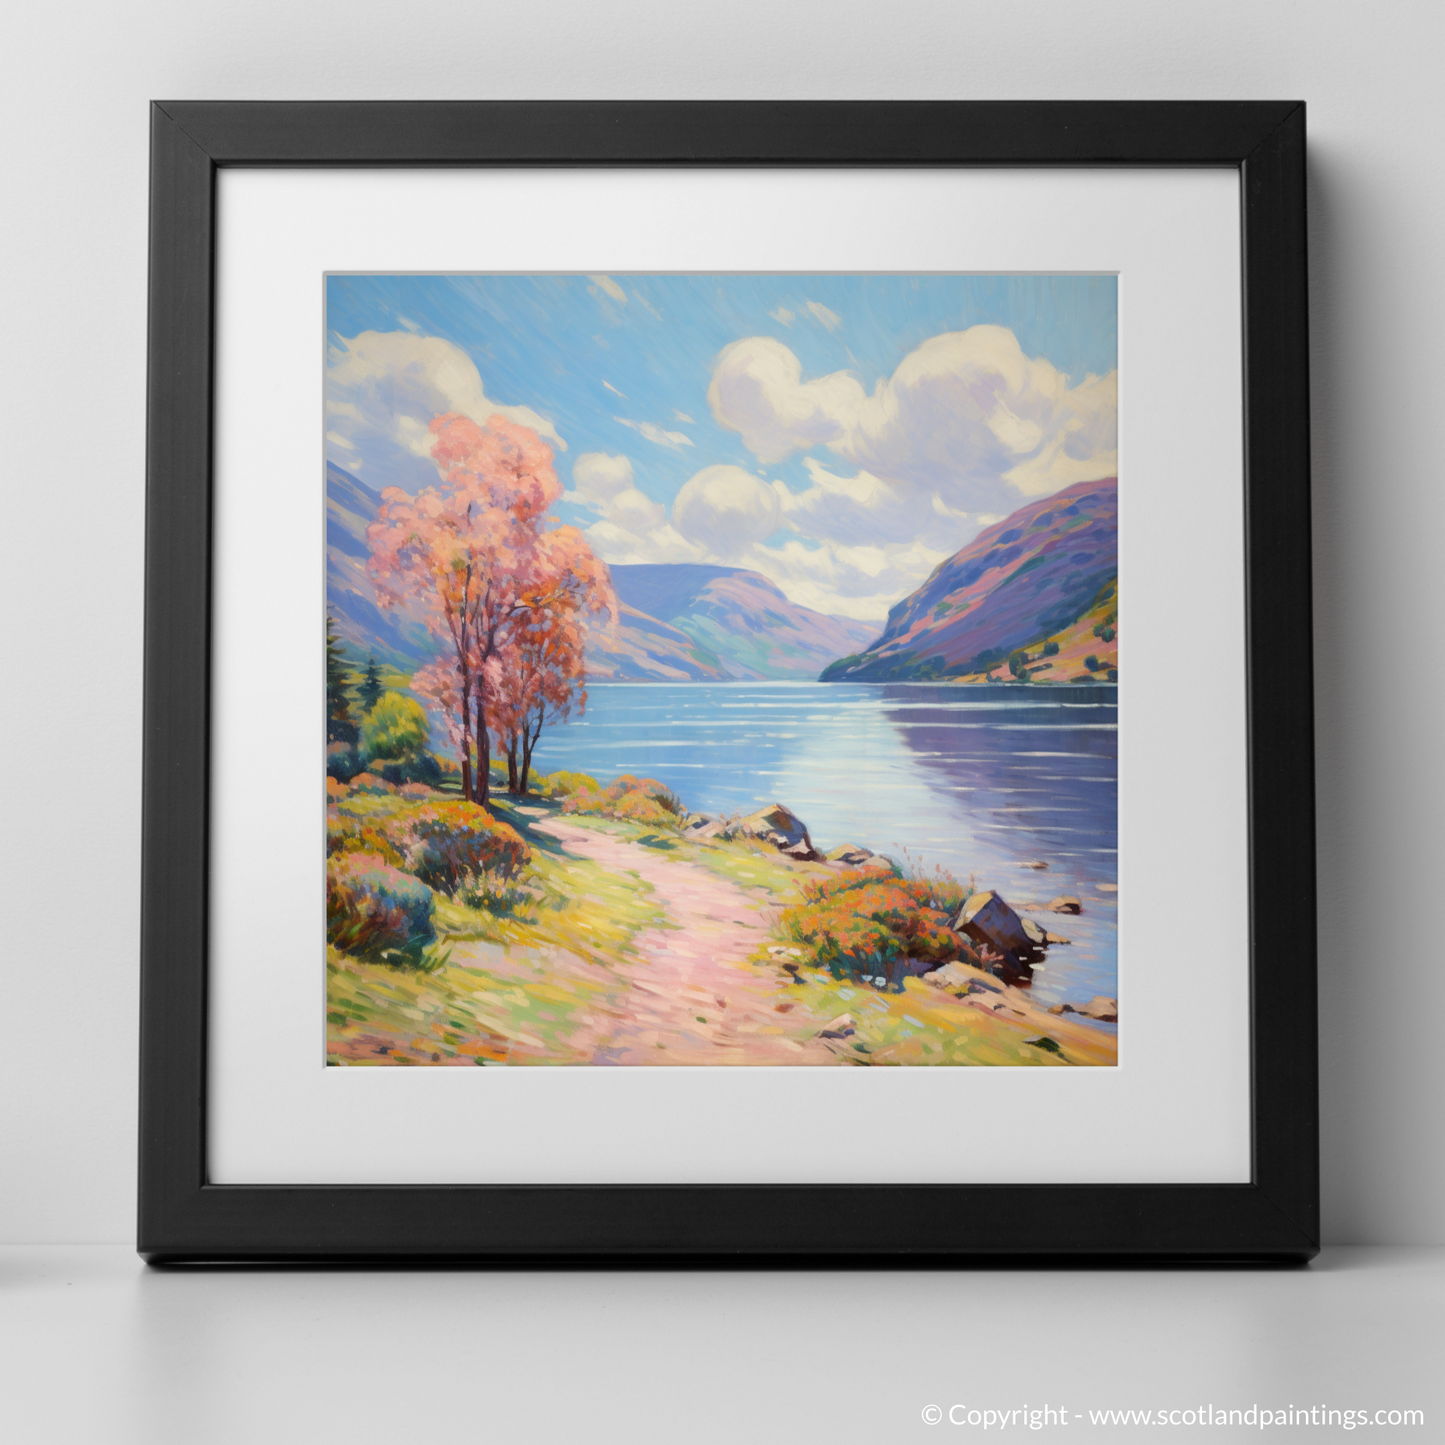 Art Print of Loch Earn, Perth and Kinross in summer with a black frame